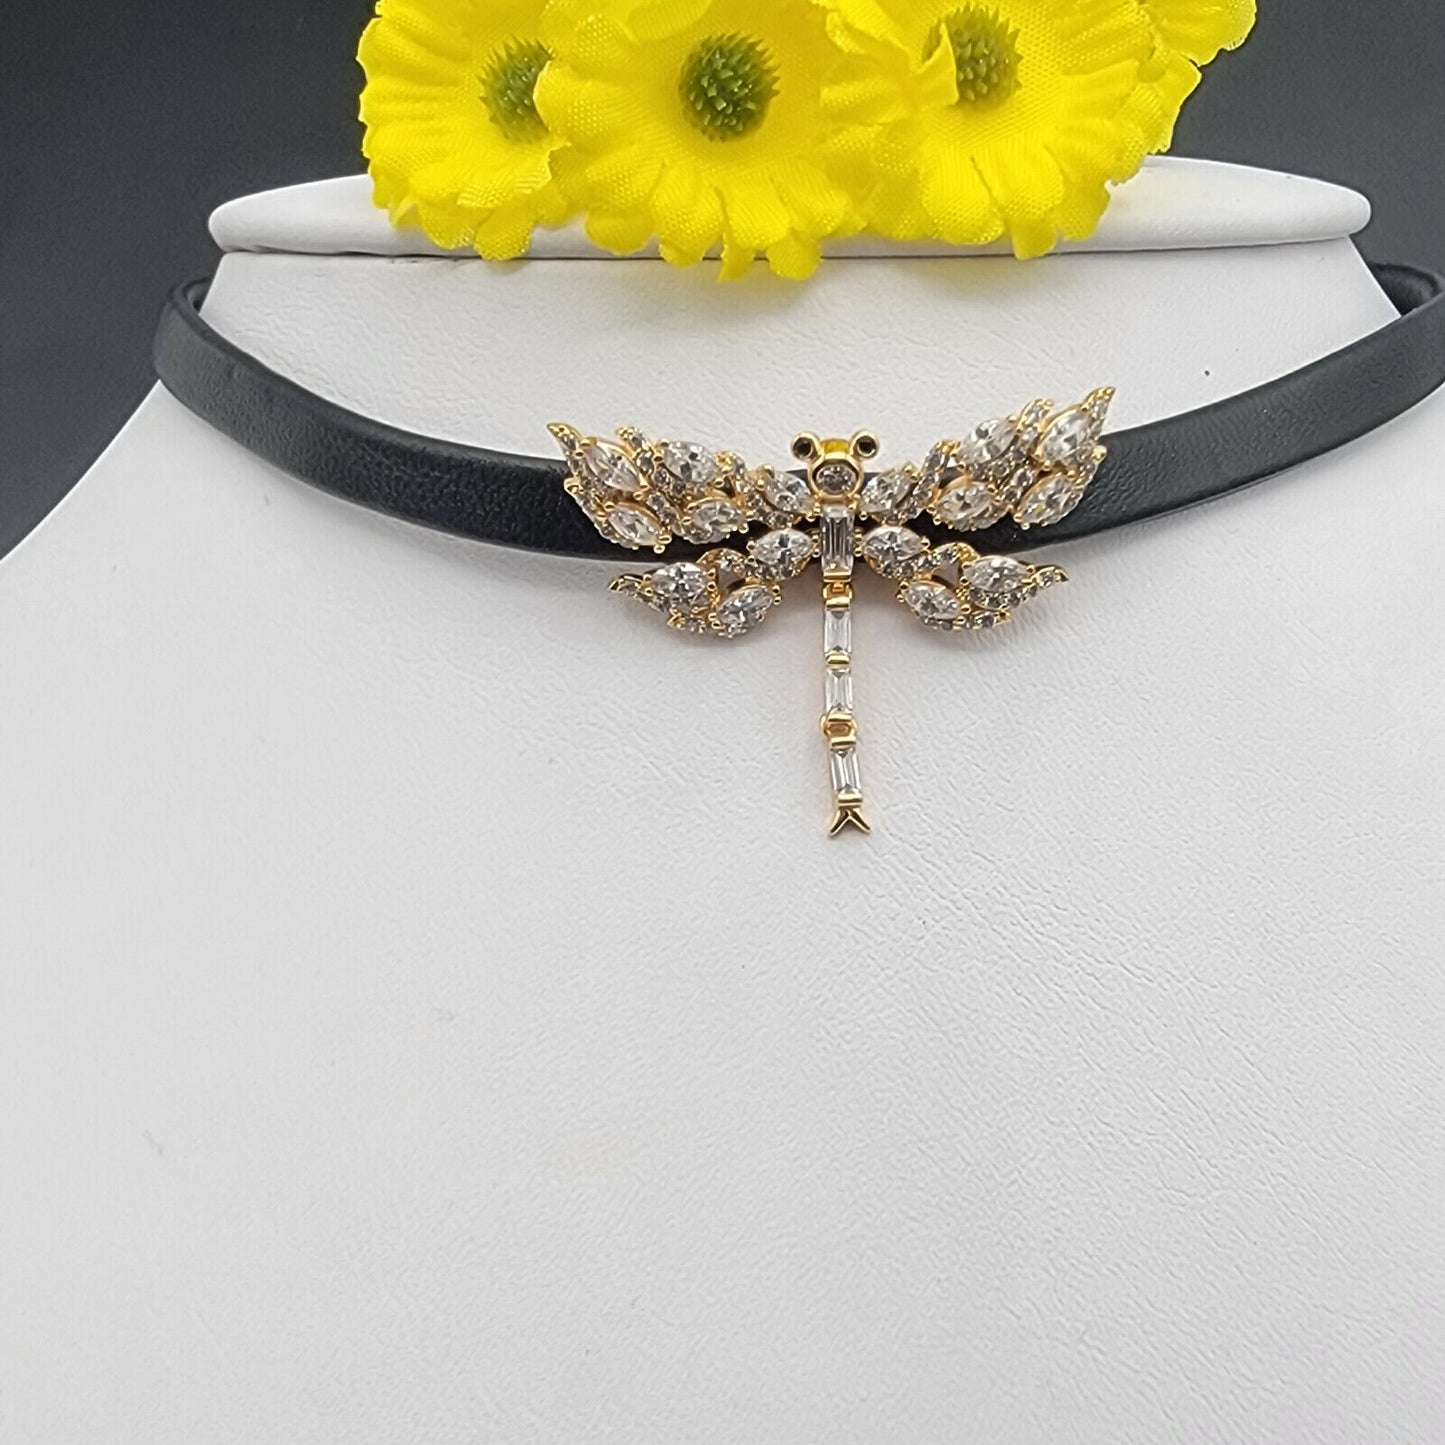 Necklaces - 18K Gold Plated. Dragonfly Choker Collar Necklace. Black cord with Lobster Clasp